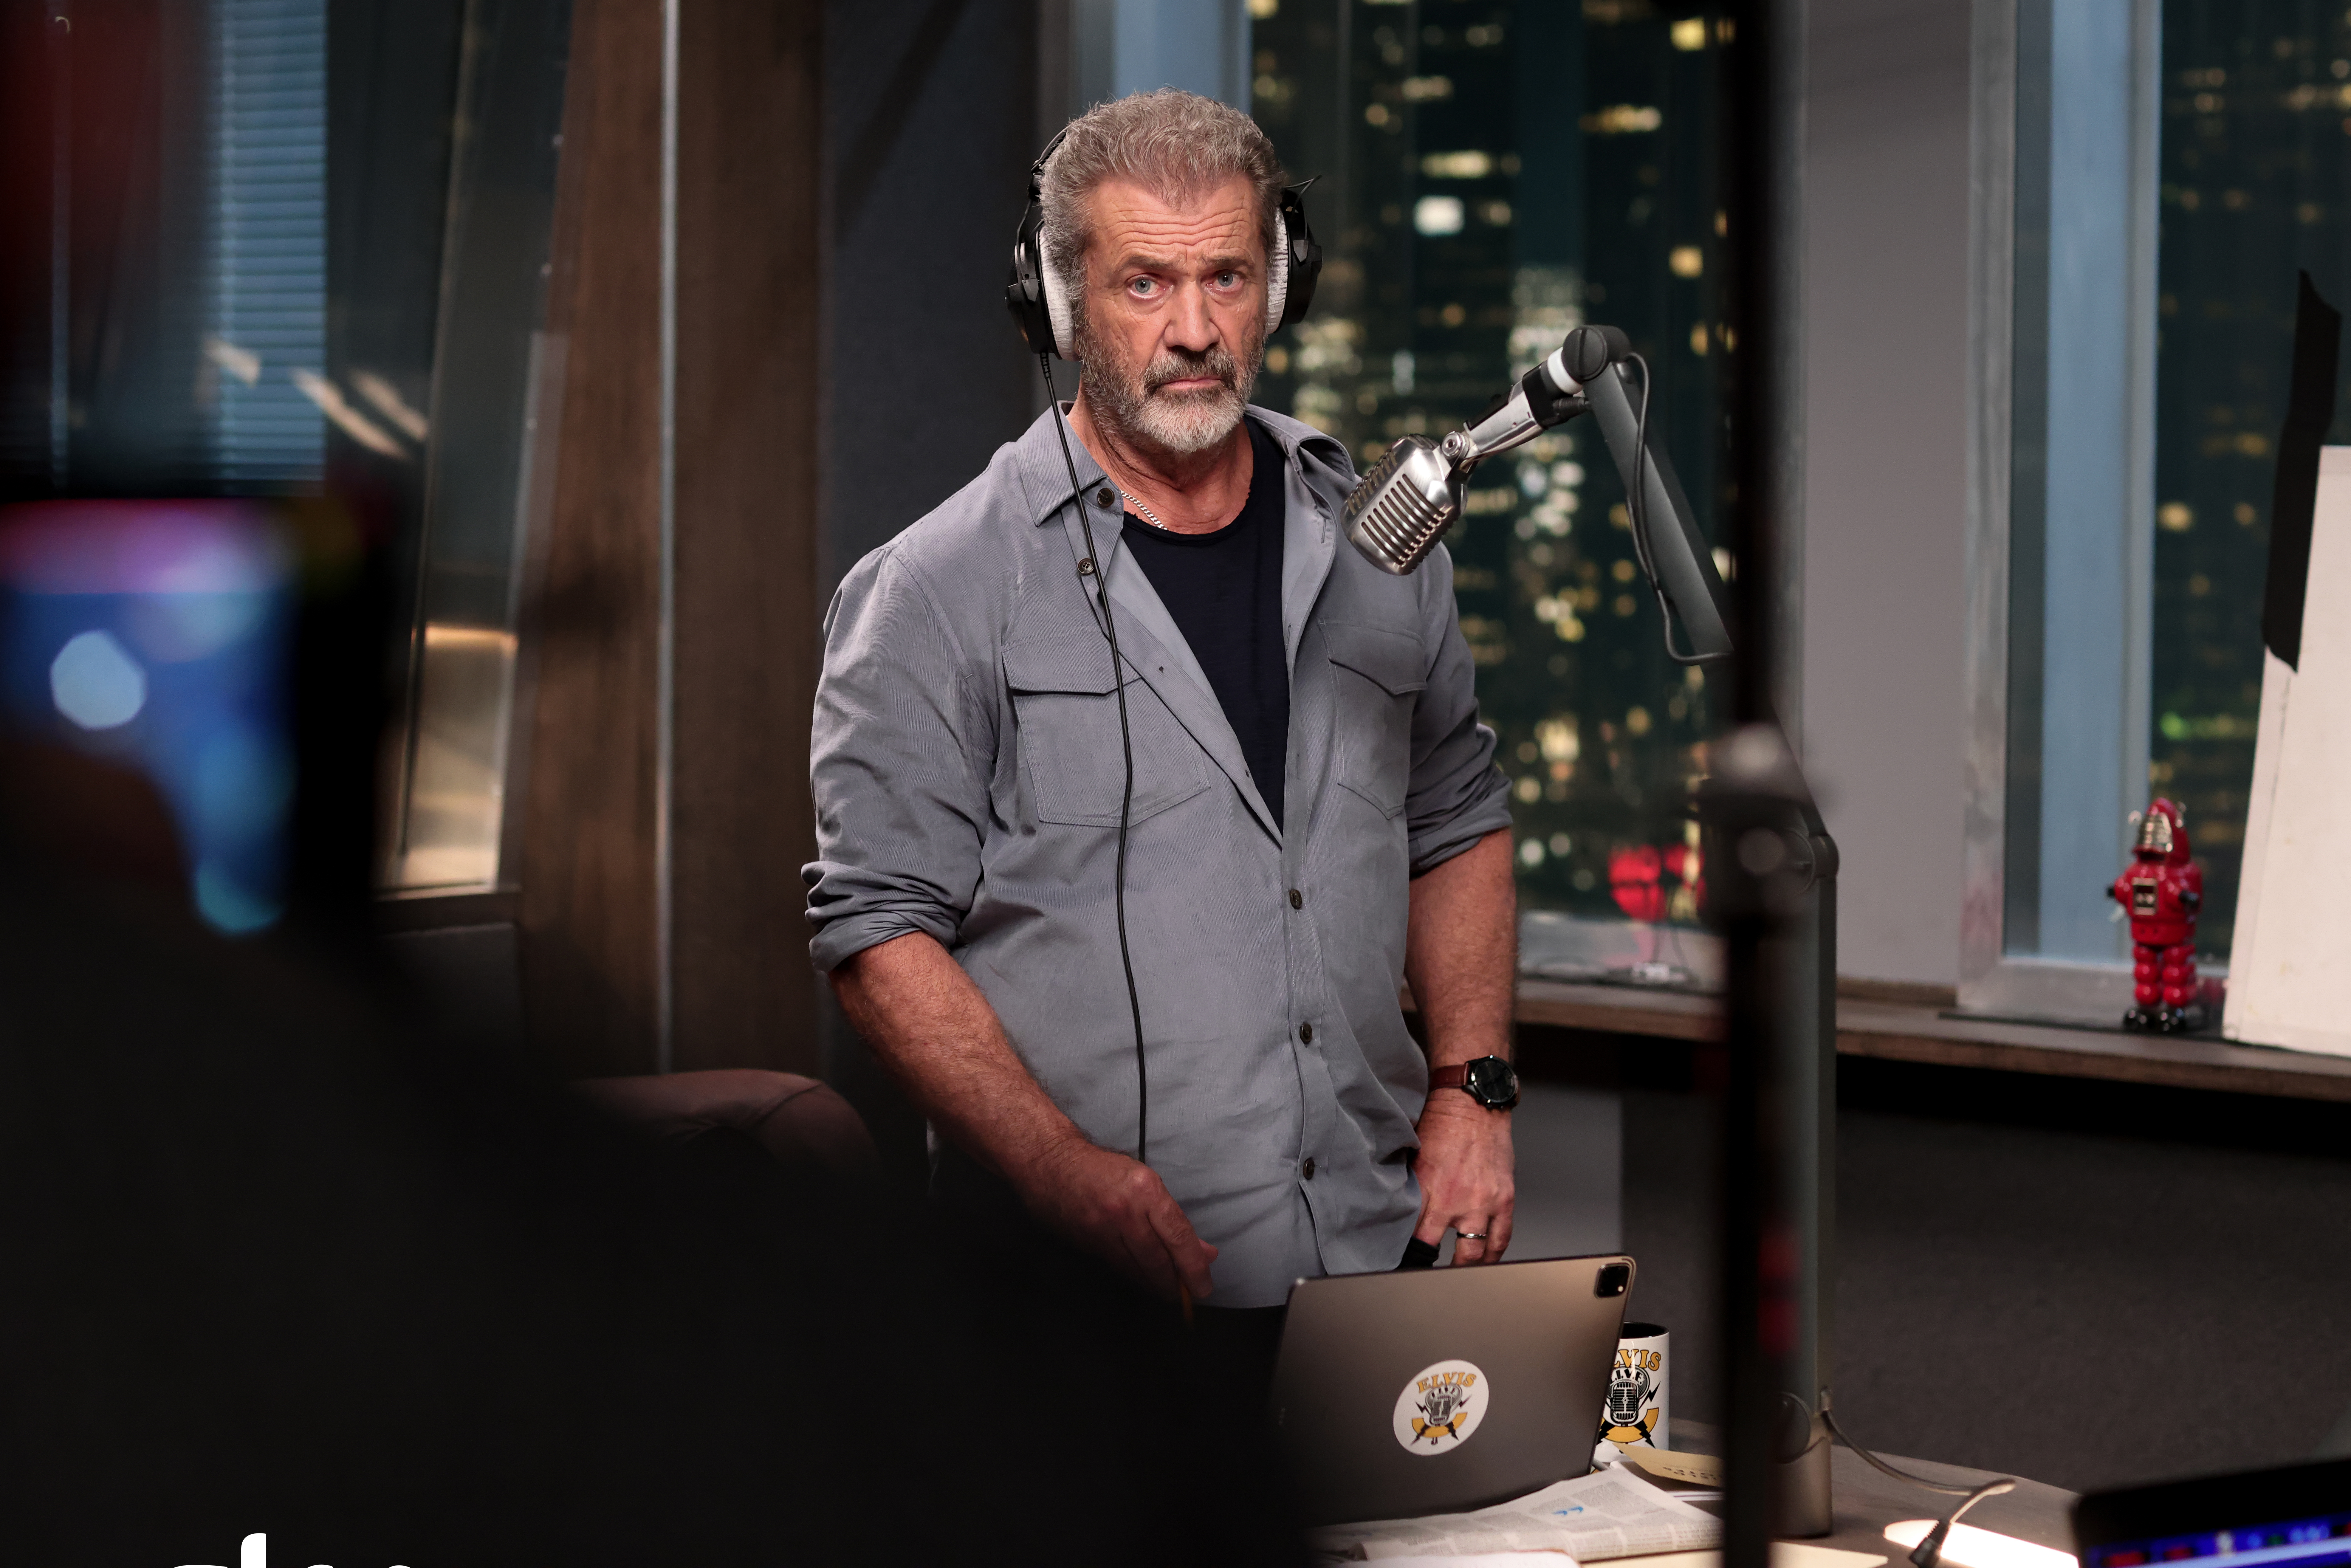 On the line, Mel Gibson protagonista del nuovo thriller Sky Original